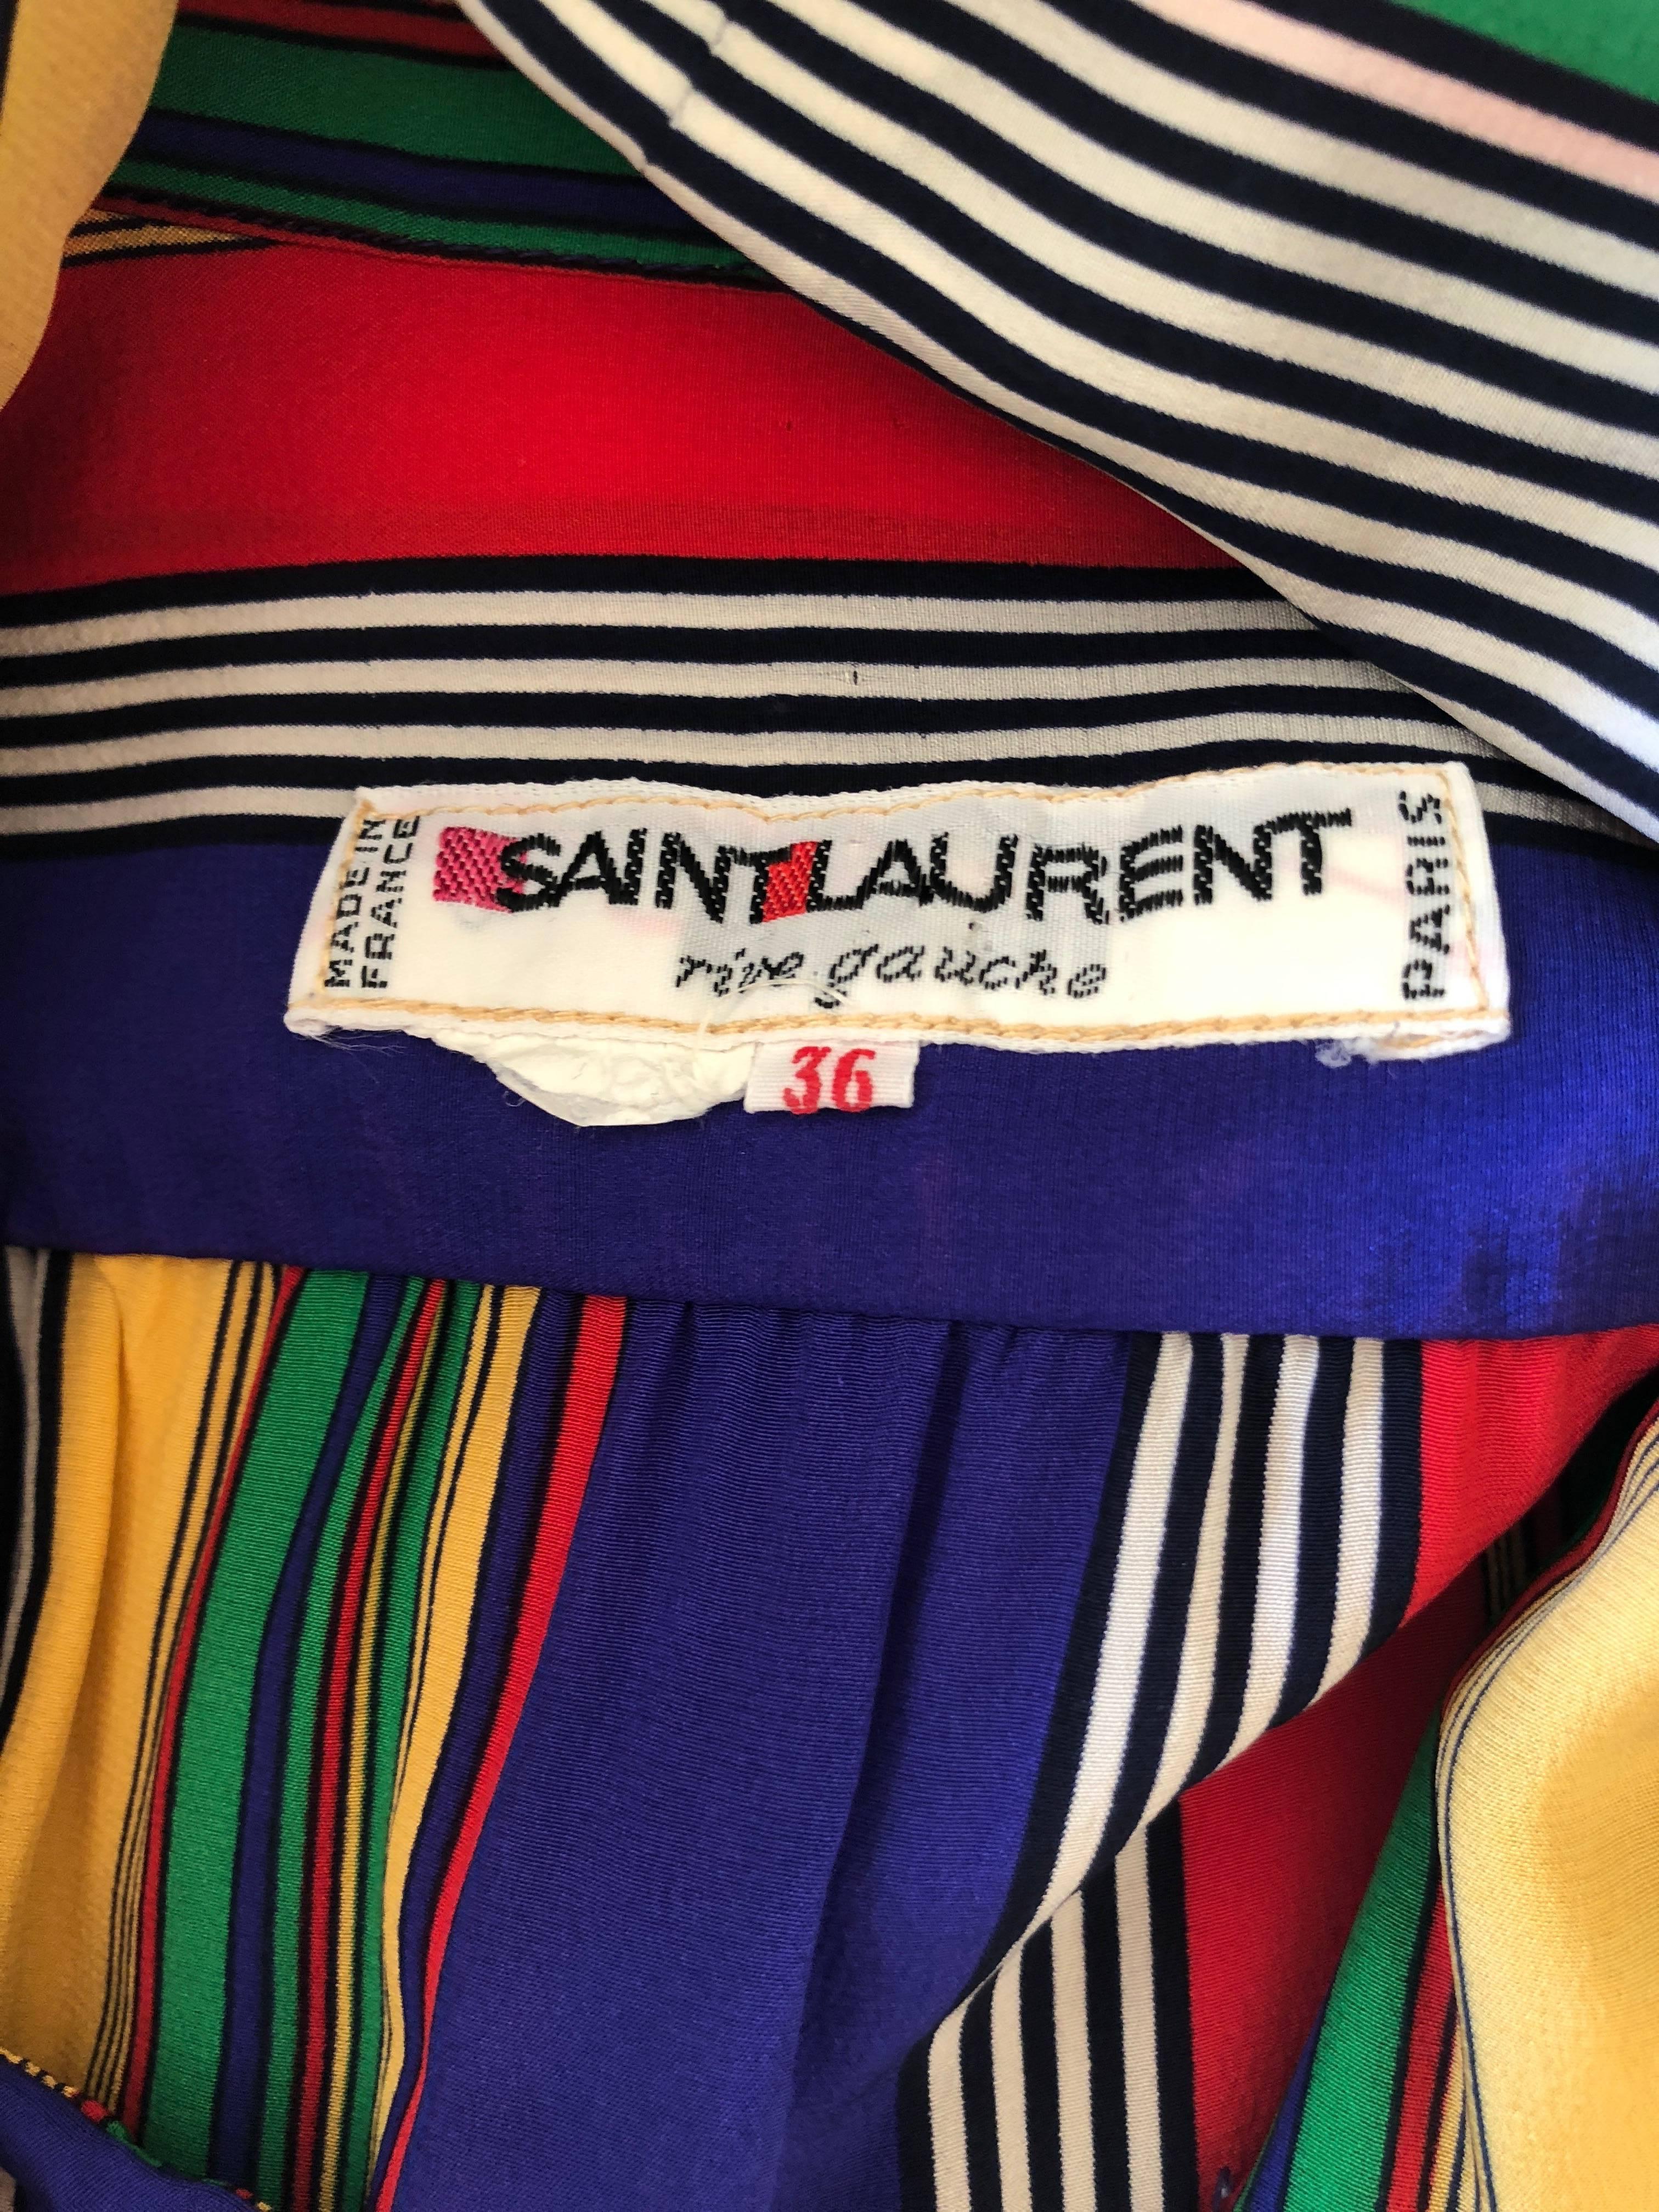 Yves Saint Laurent Rive Gauche 1970's Stripe Silk Day Dress with Bow For Sale 6